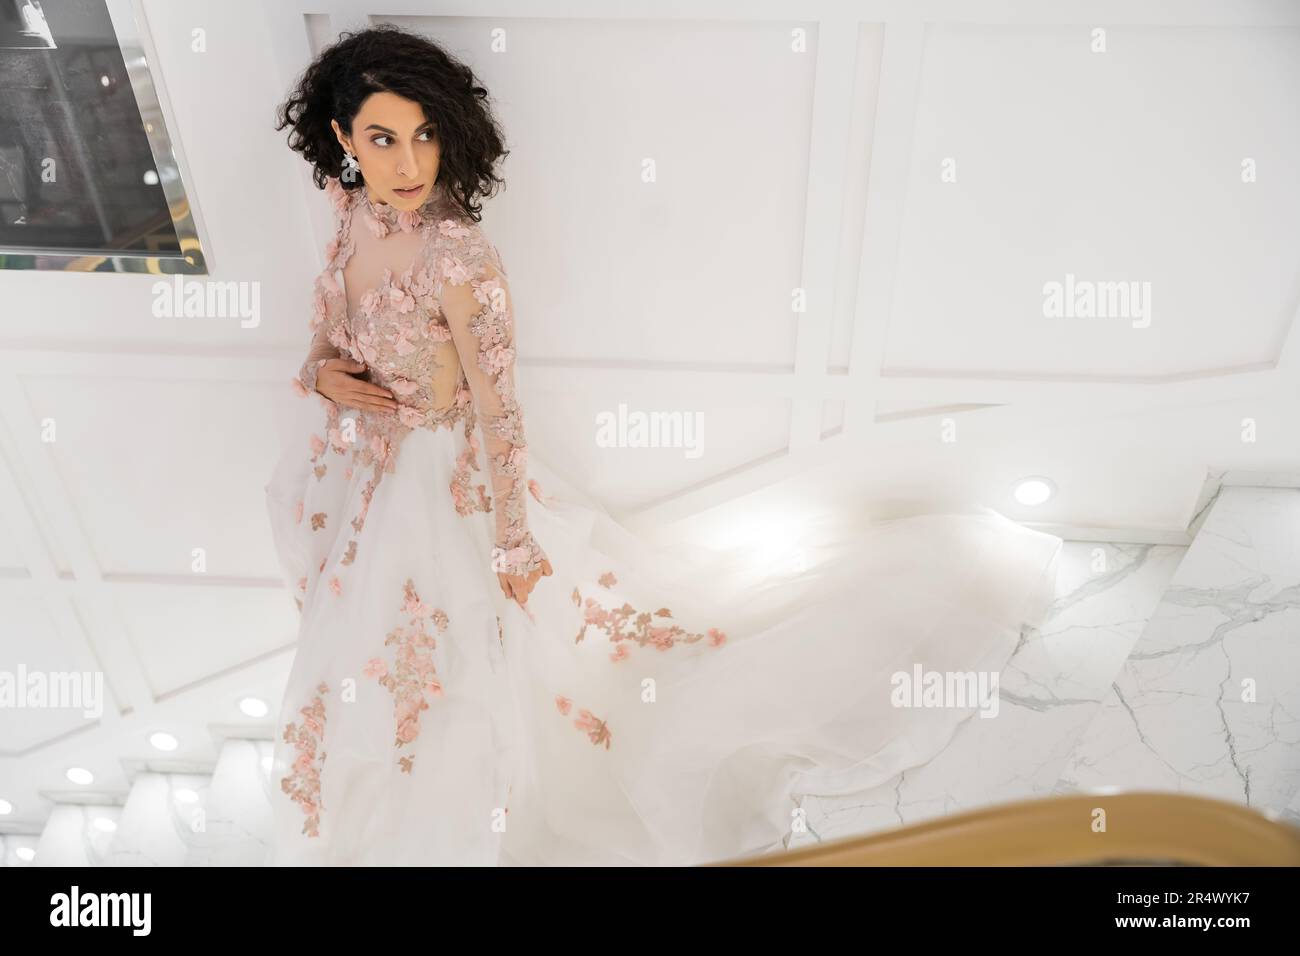 high angle view of brunette middle eastern woman with wavy hair standing in gorgeous and floral wedding dress with train while looking away in luxurio Stock Photo